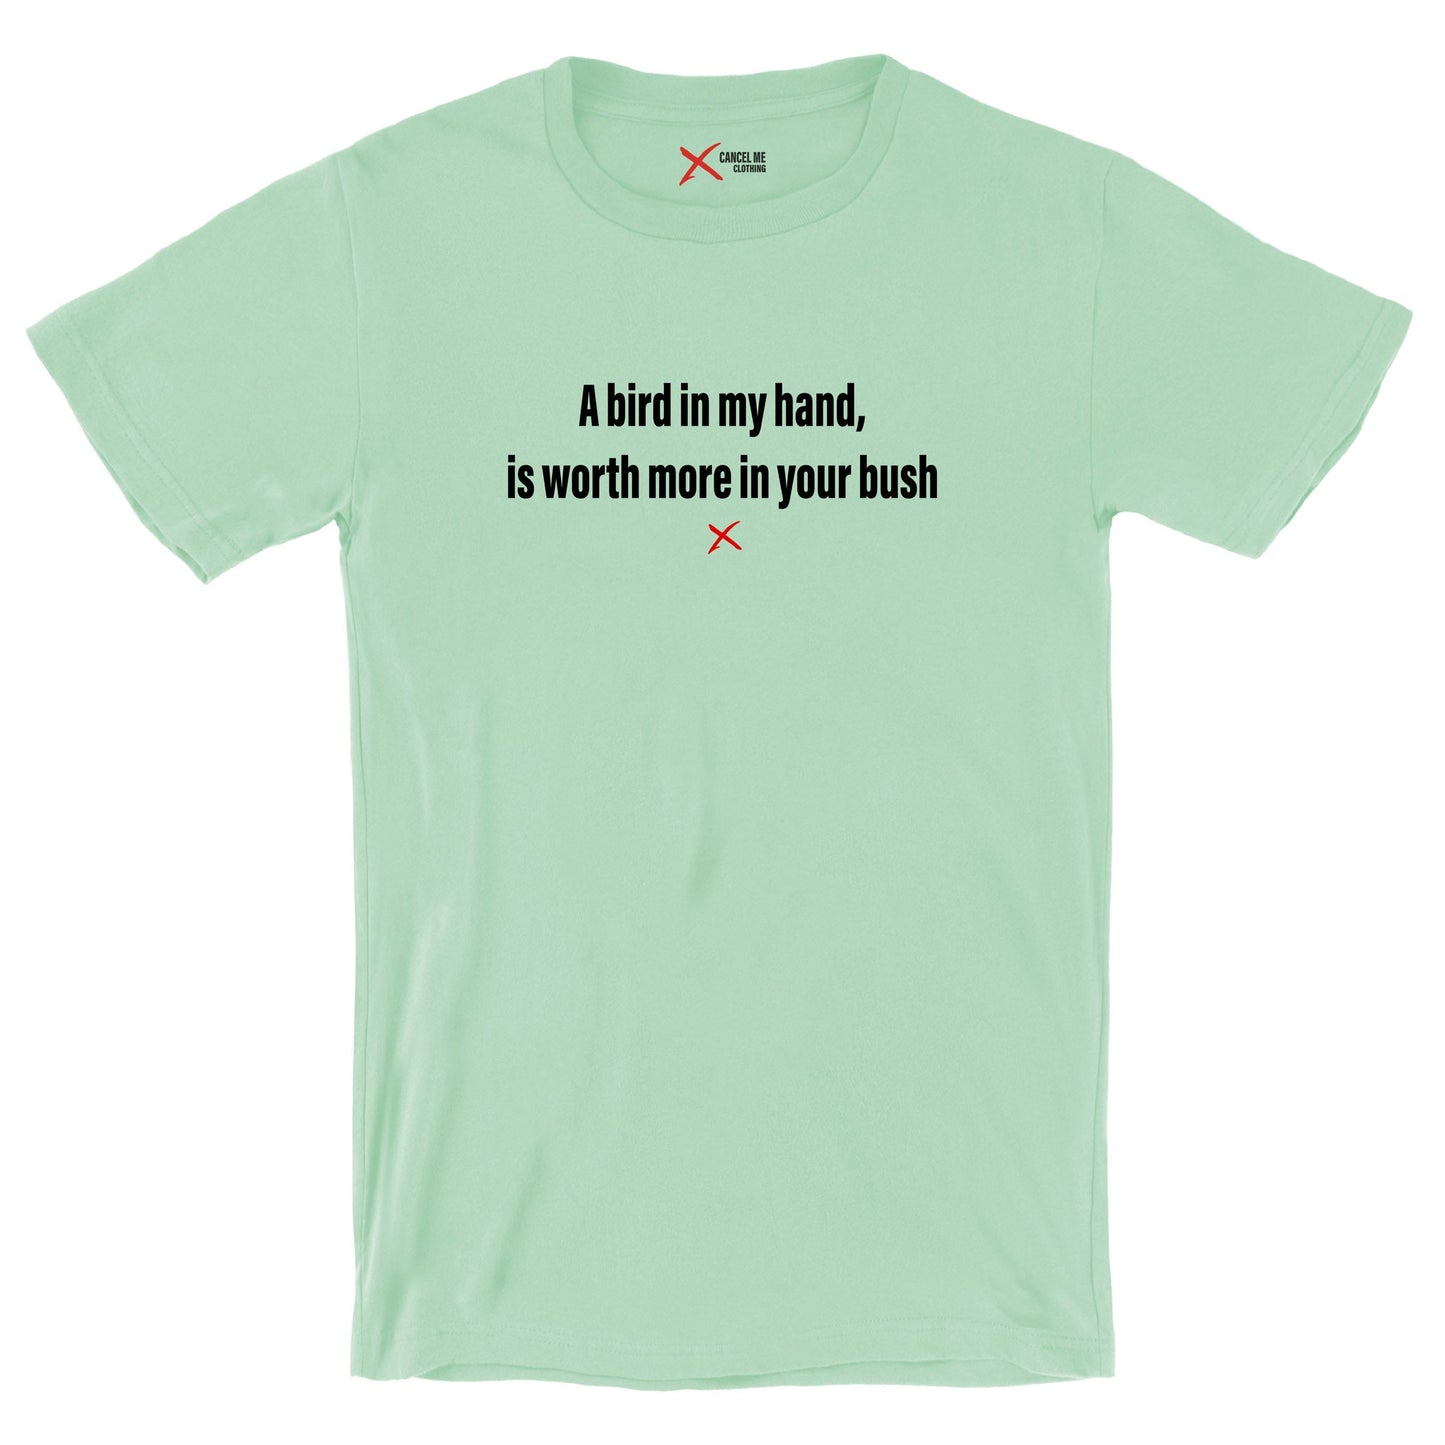 A bird in my hand, is worth more in your bush - Shirt